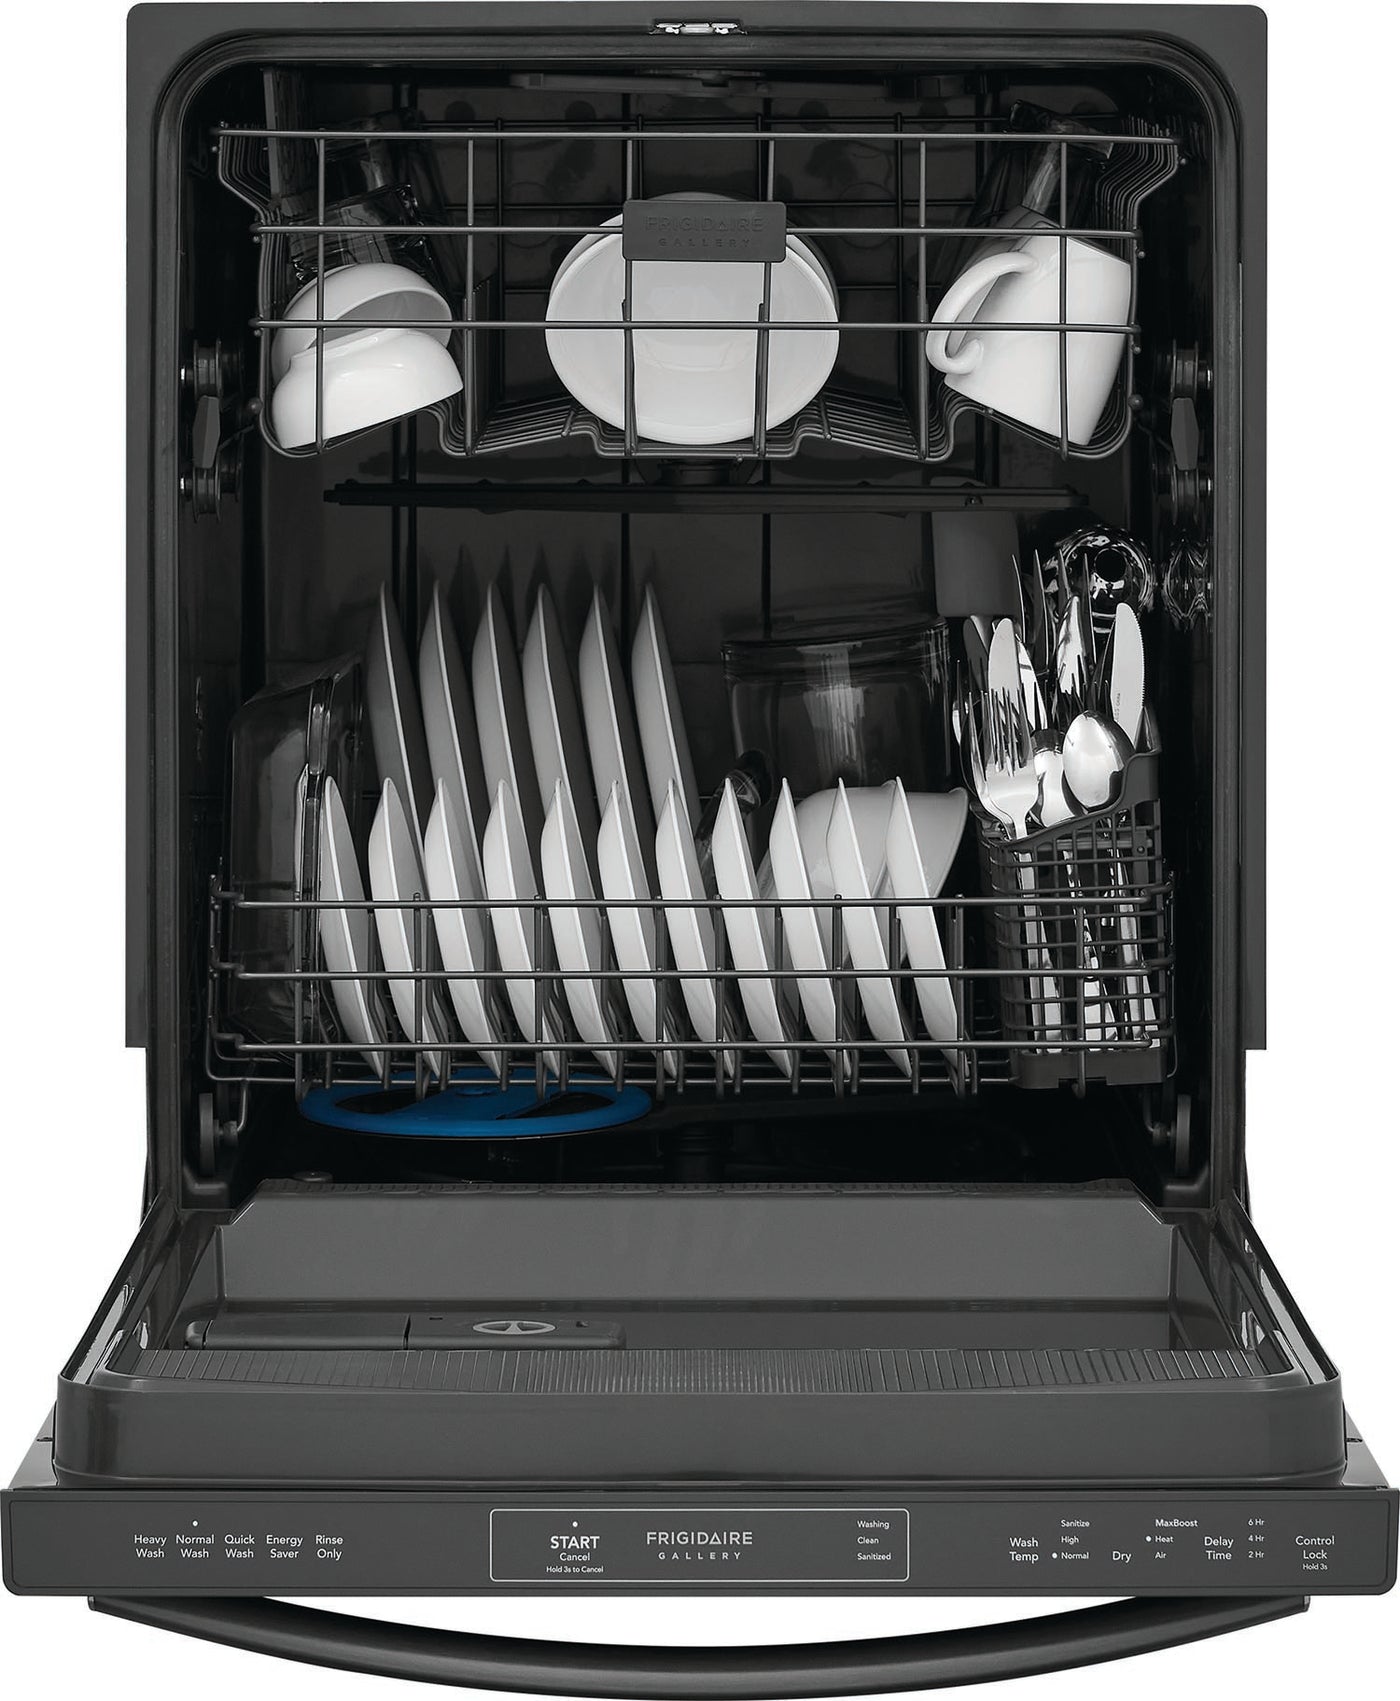 Frigidaire Gallery Smudge-Proof Black Stainless Steel 24" Built-In Dishwasher - GDPH4515AD